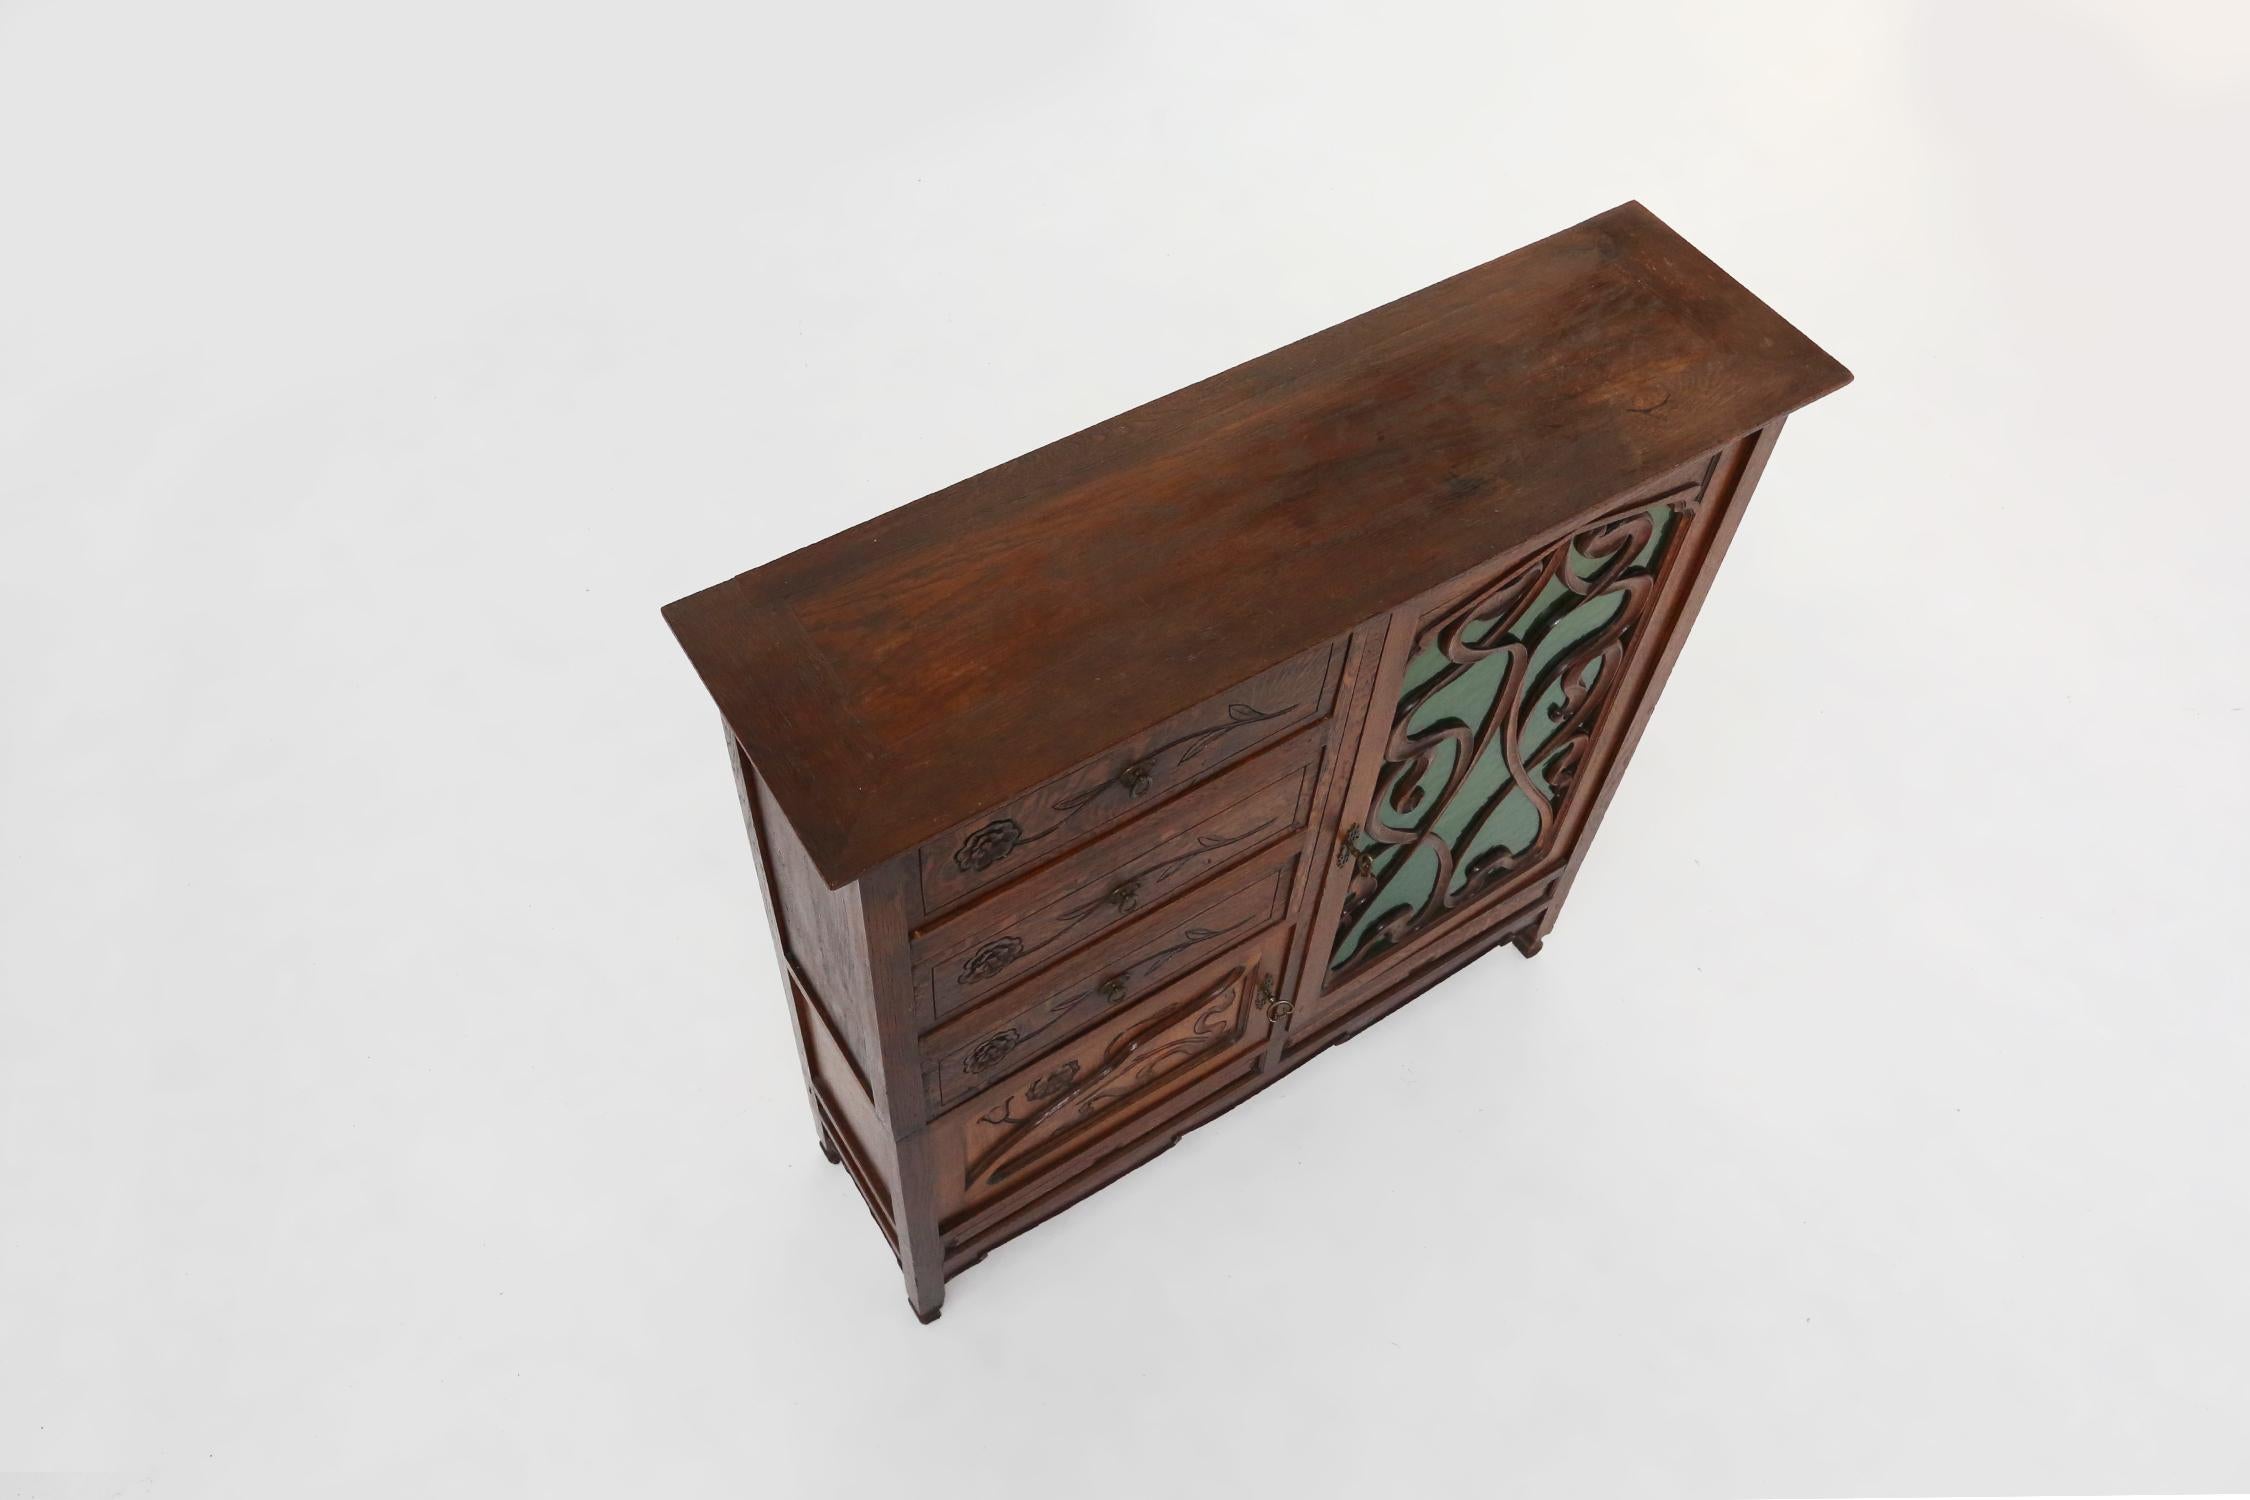 Remarkable Art Nouveau cabinet in oak with green glass door, France, 1910 For Sale 11